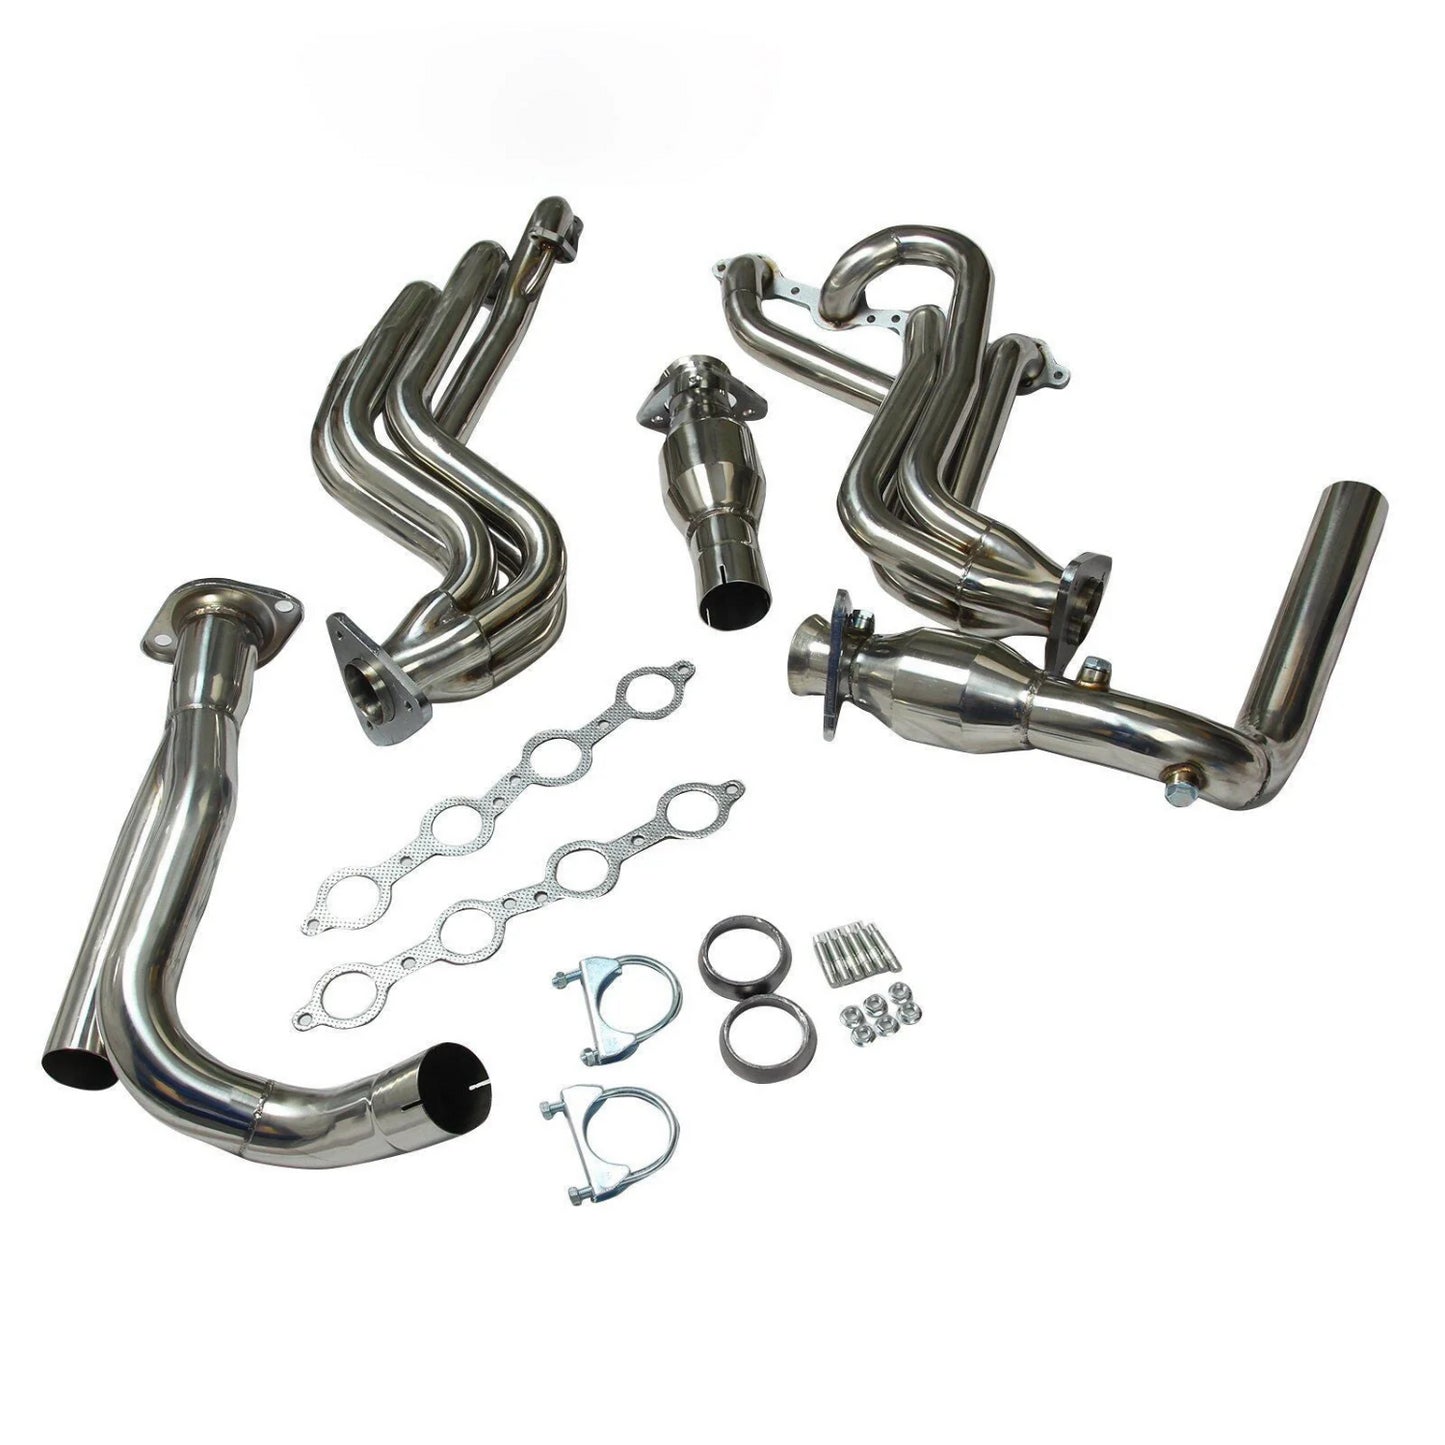 Stainless Manifold Header+Y-Pipe+Gasket for GMC/CHEVY GMT800 V8 Engine Truck/Suv